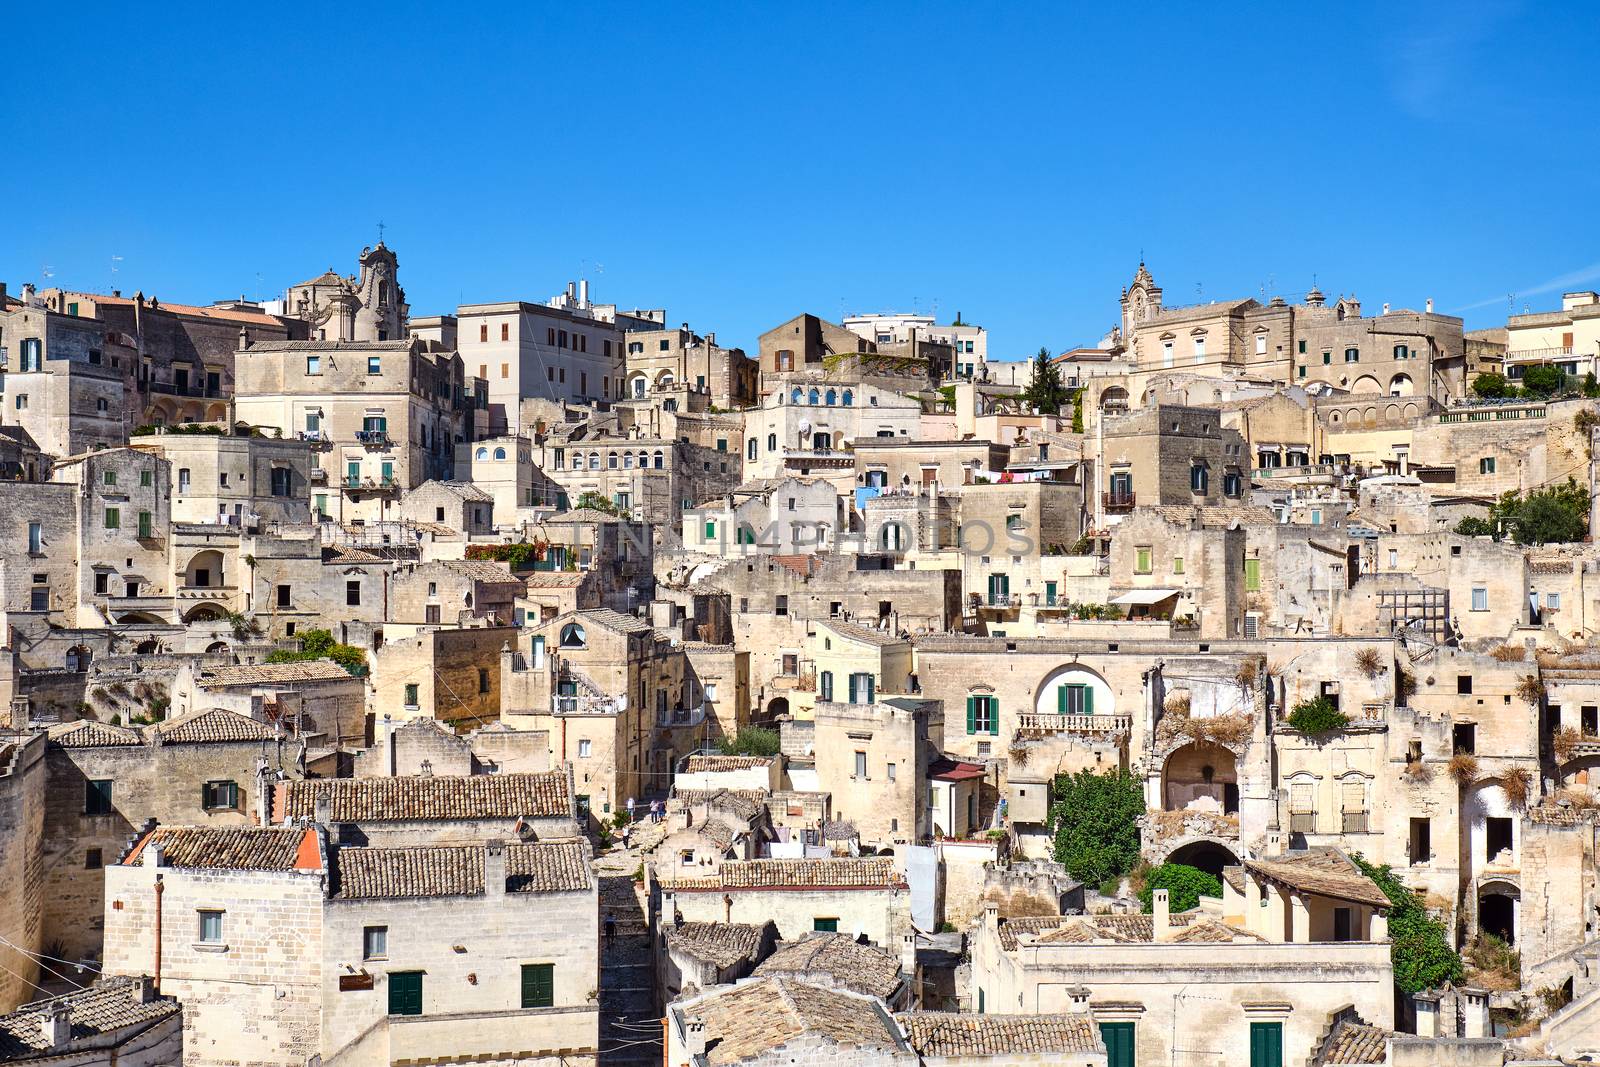 The old houses of Matera in southern Italy on a sunny day